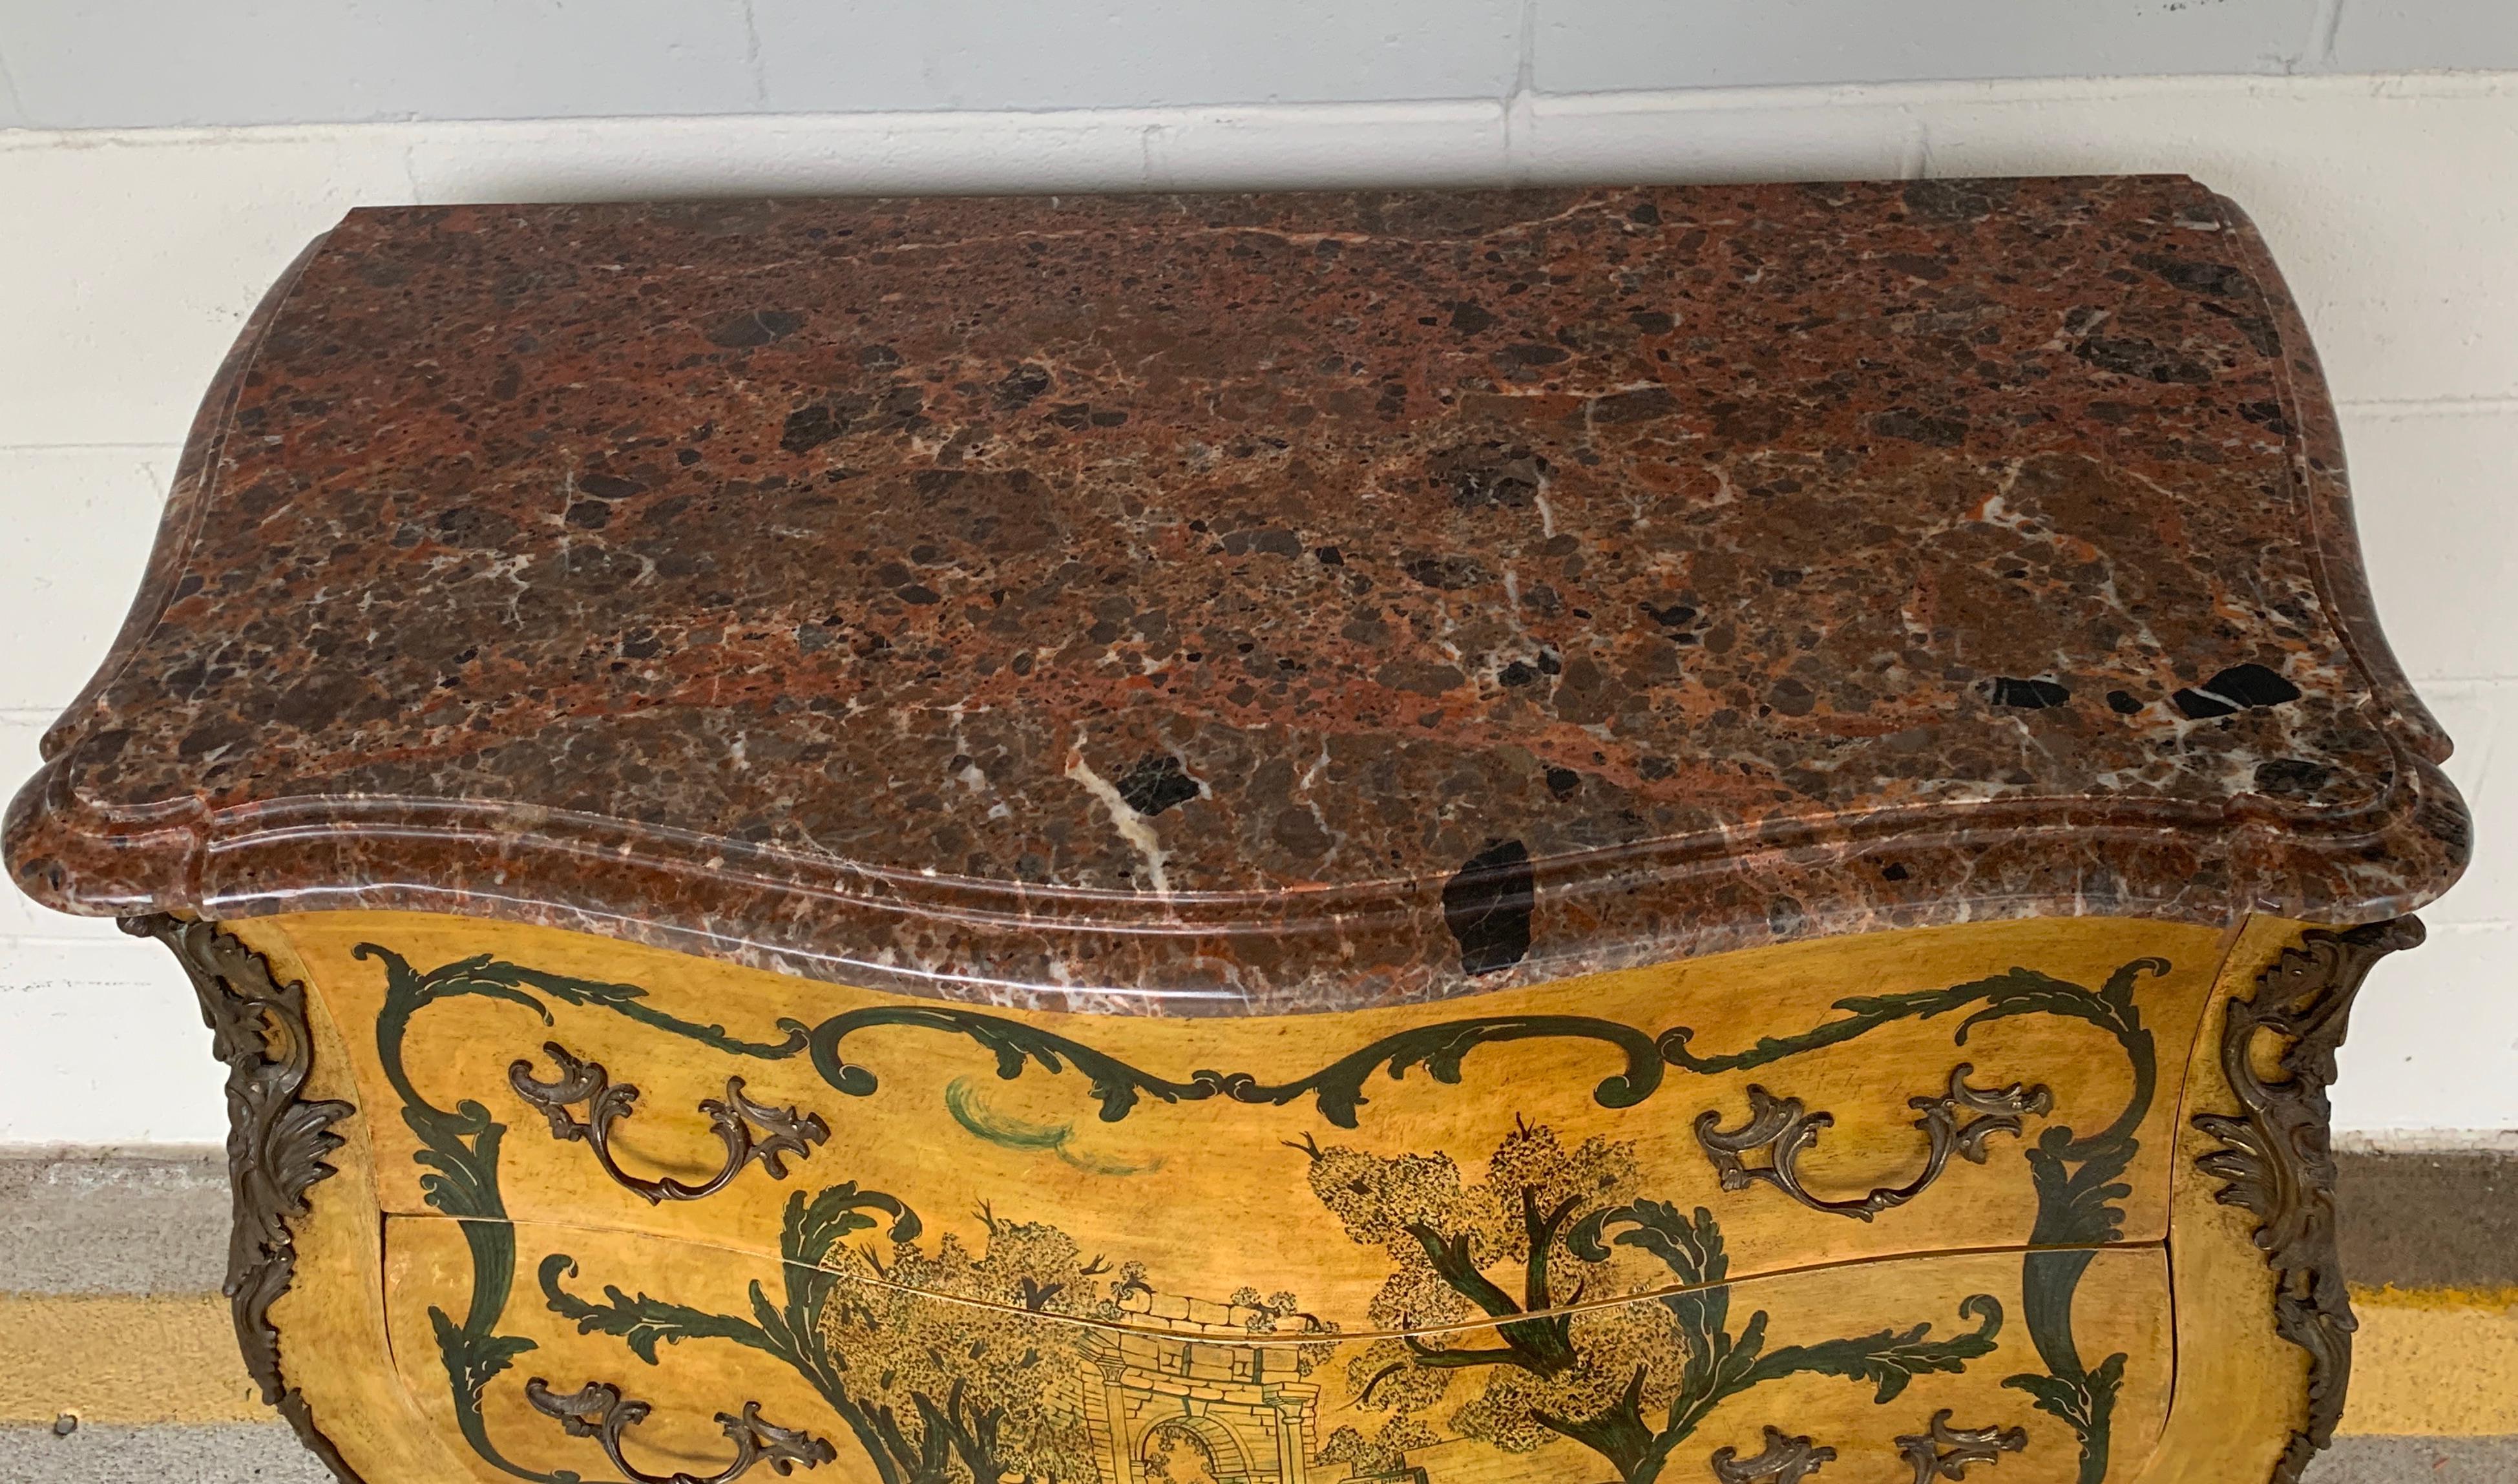 Fine Italian Piranesi Topographical Polychromed Marble Top Commode In Good Condition For Sale In West Palm Beach, FL